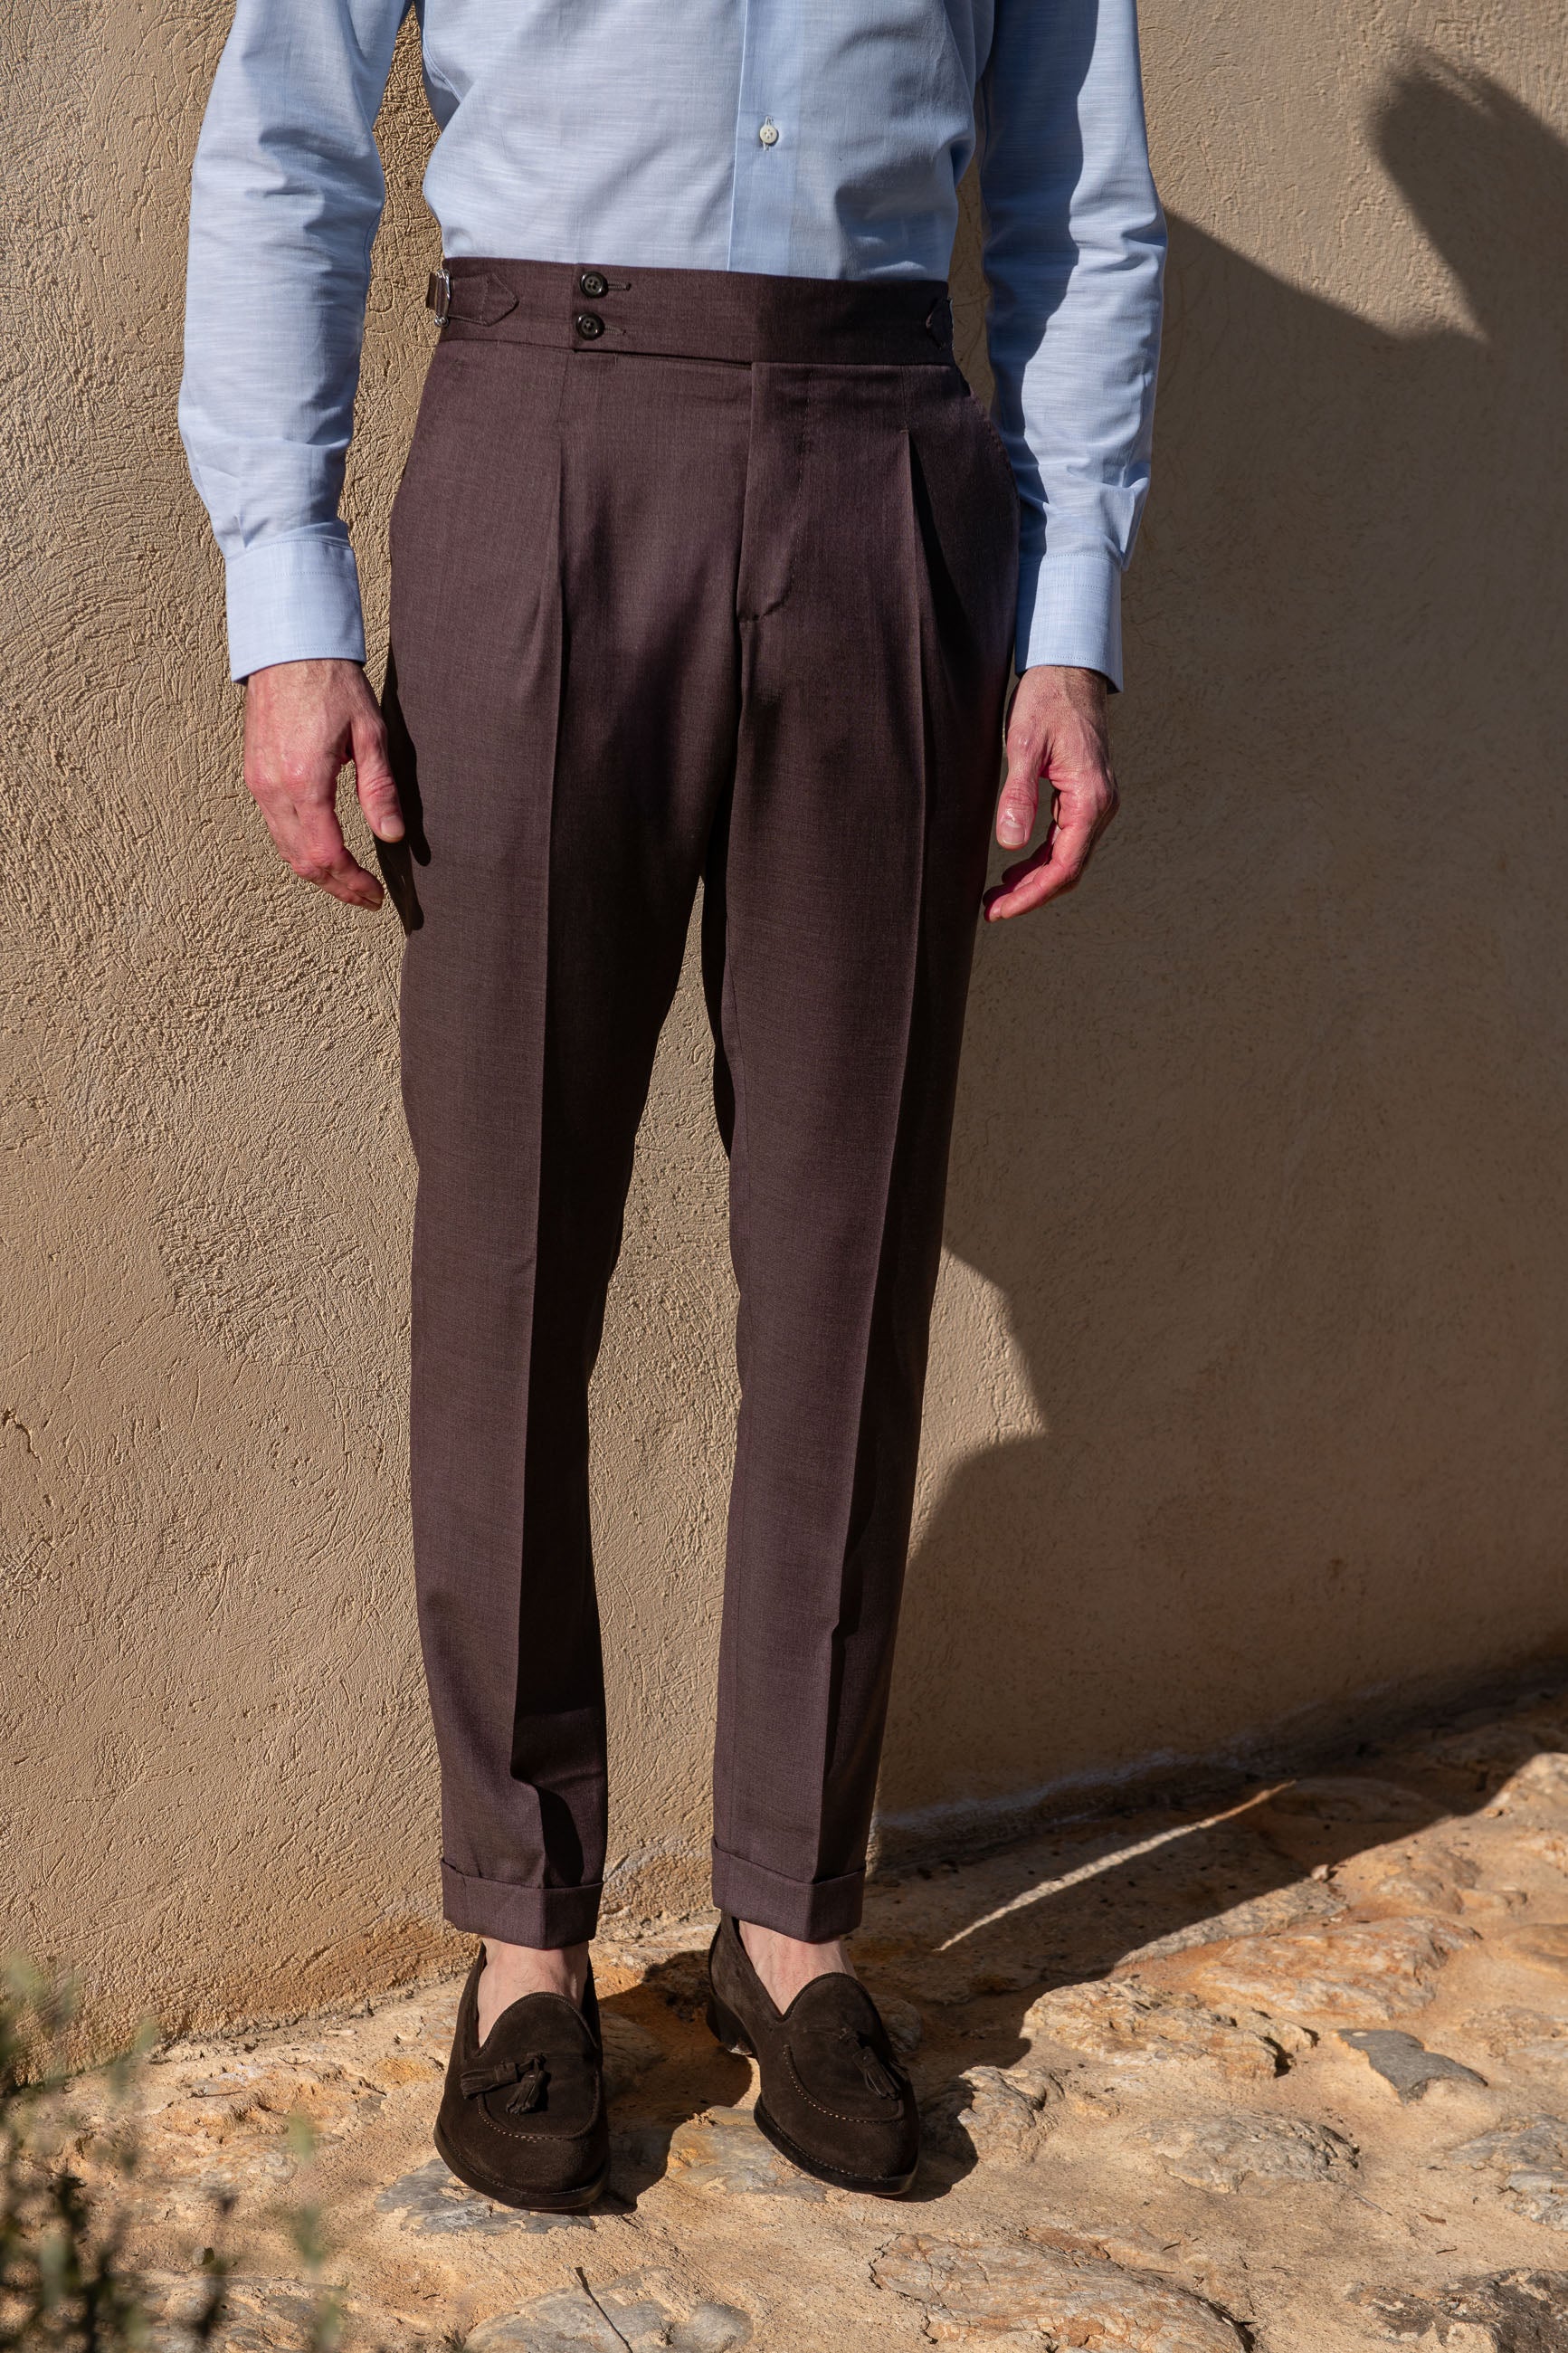 Pantaloni Bordeaux " Soragna Capsule Collection" - Made in Italy